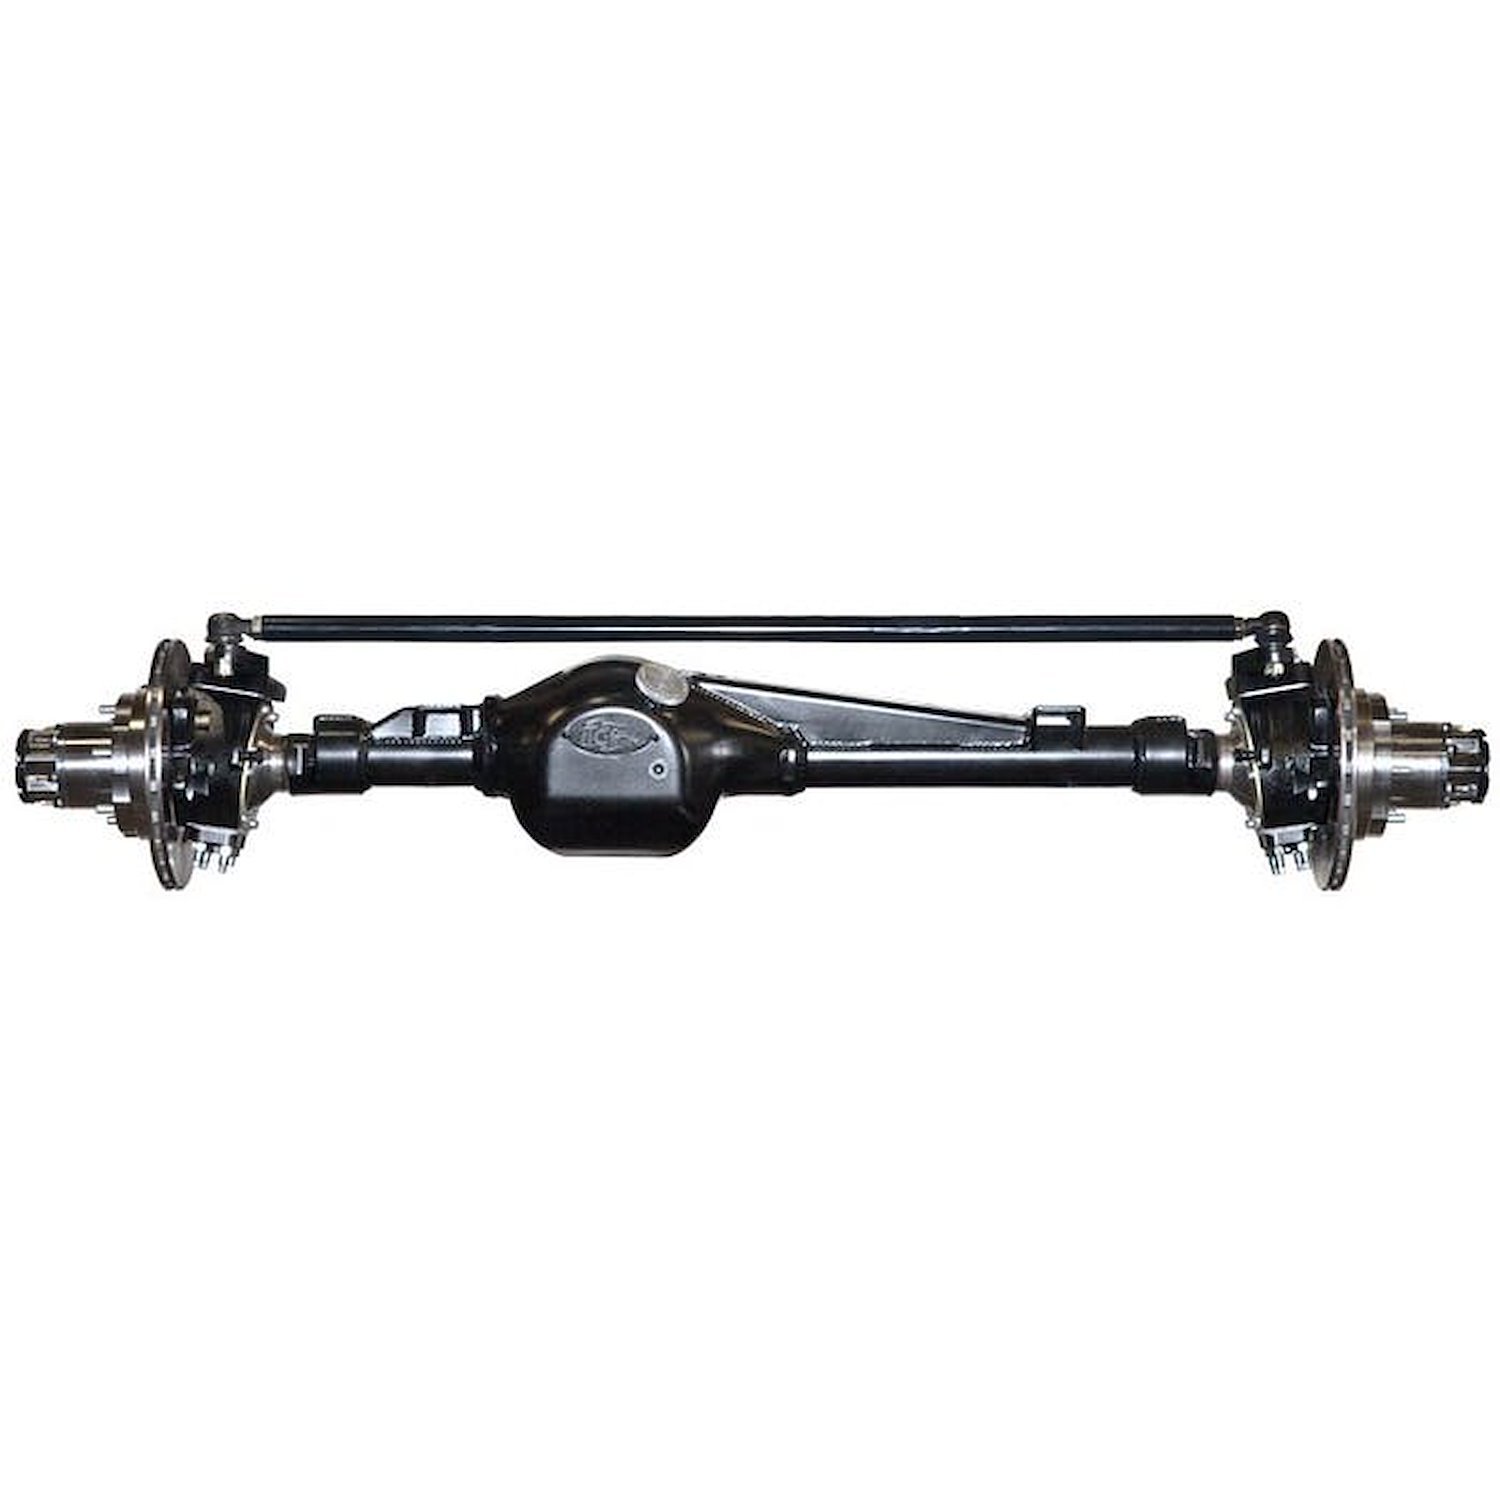 301645-1-KIT Rock Assault Fully-Built Front Axles, +5 Width, RHD, 4-Cylinder, 5.29, Grizzly, Locking Hubs, Toyota